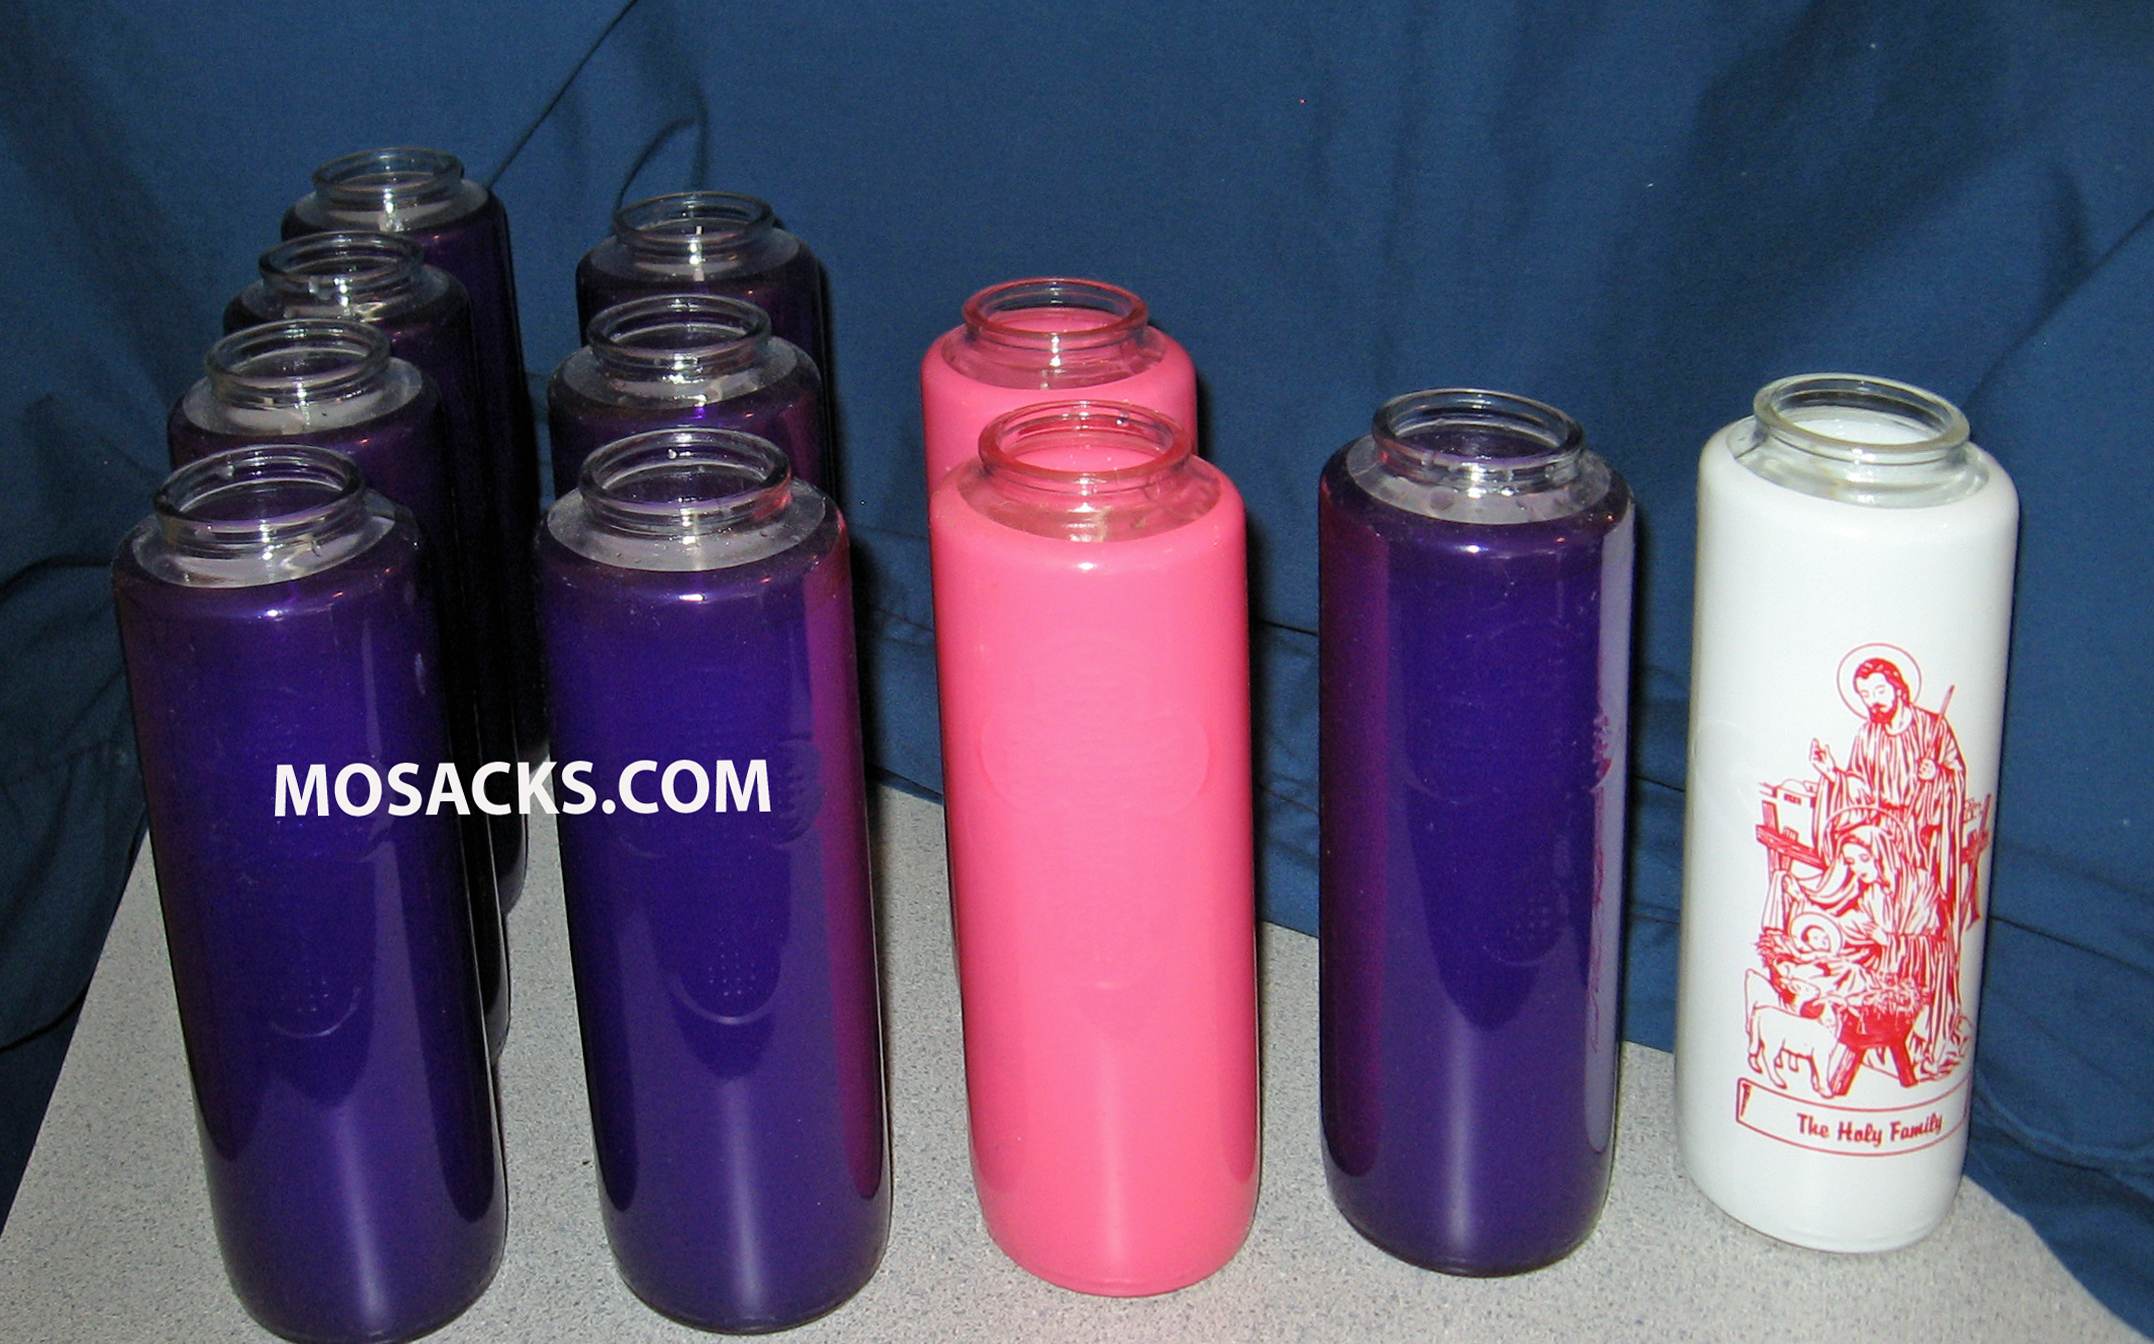 Advent Candle 6-Day Glass 11 pc. Set includes 8 Purple, 2 Rose, 1 Holy Family for the Advent Season and Christmas Week